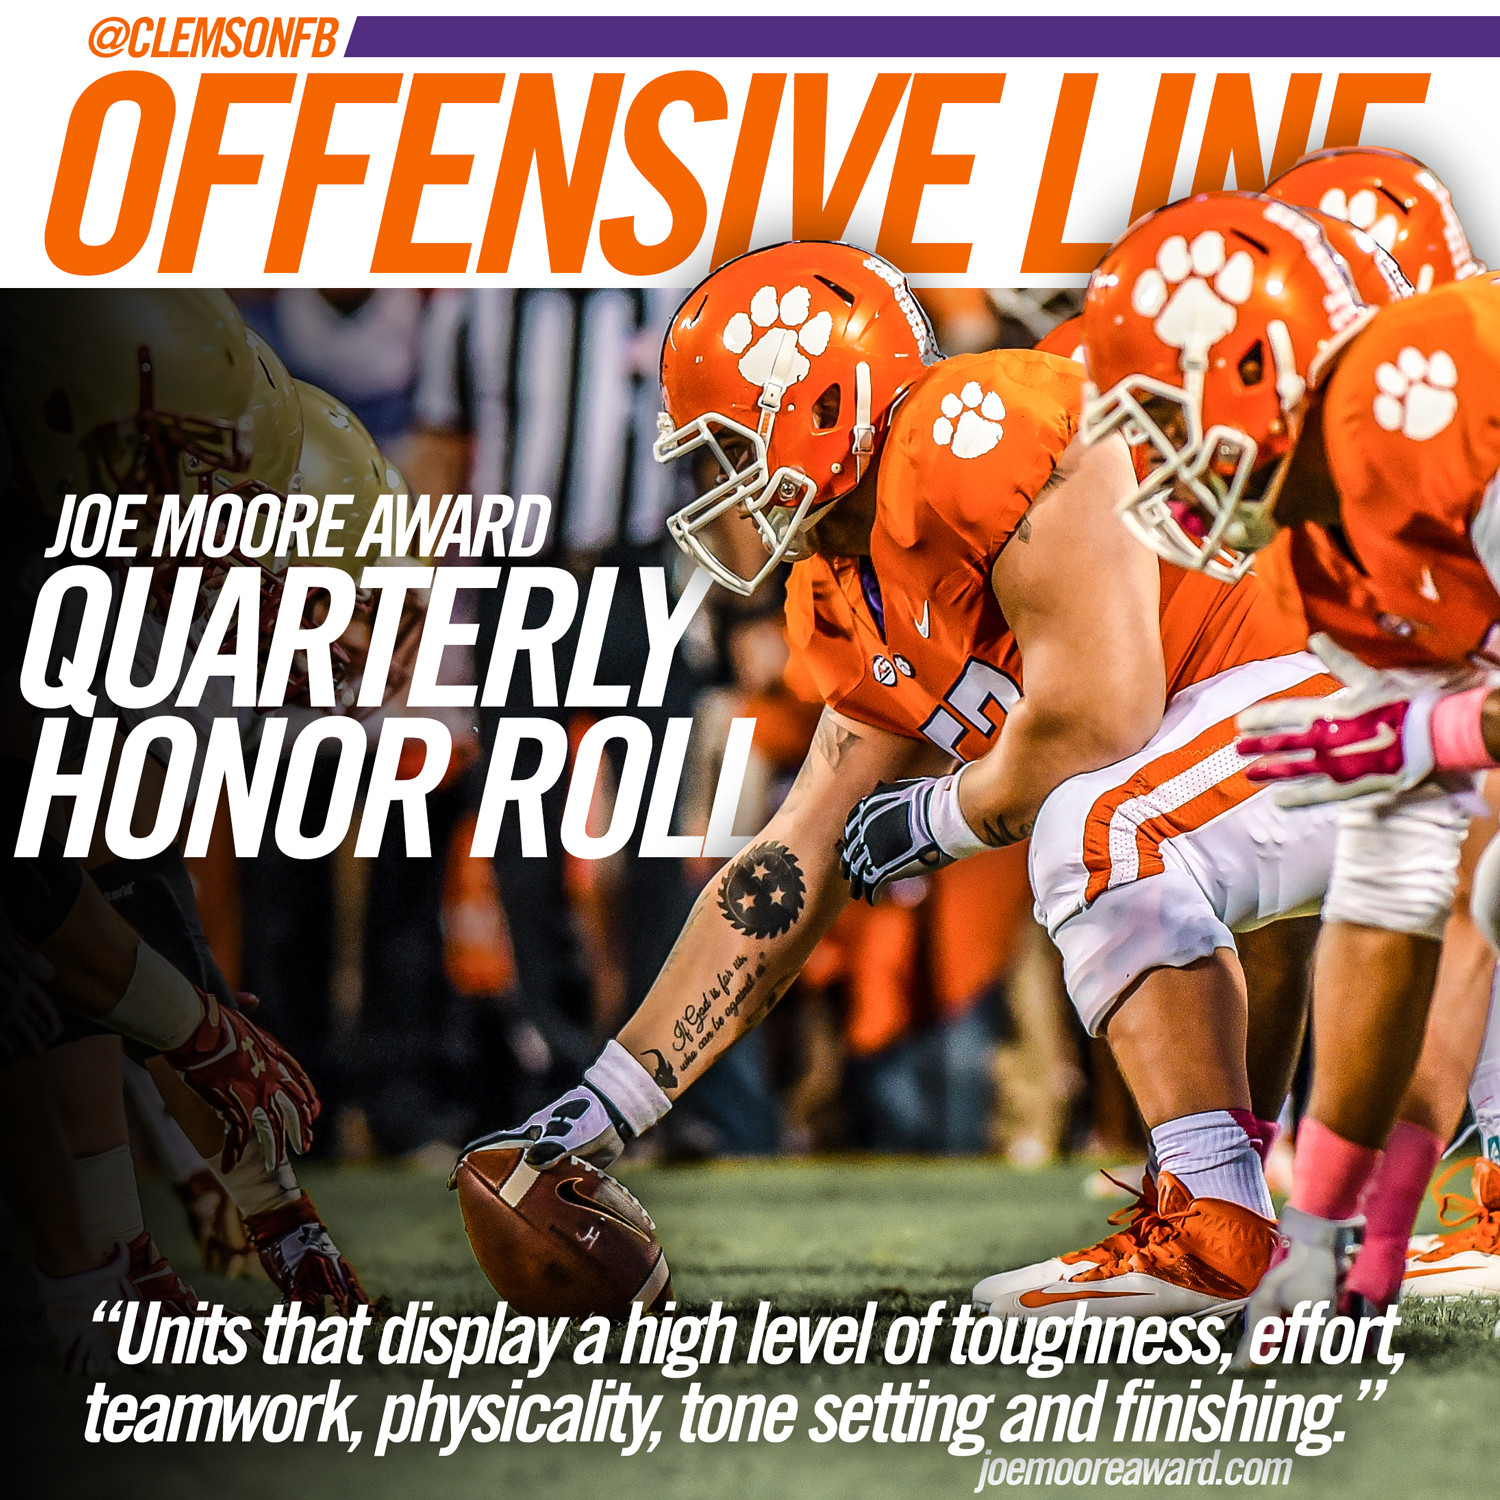 Clemson Offensive Line Honored by Moore Award